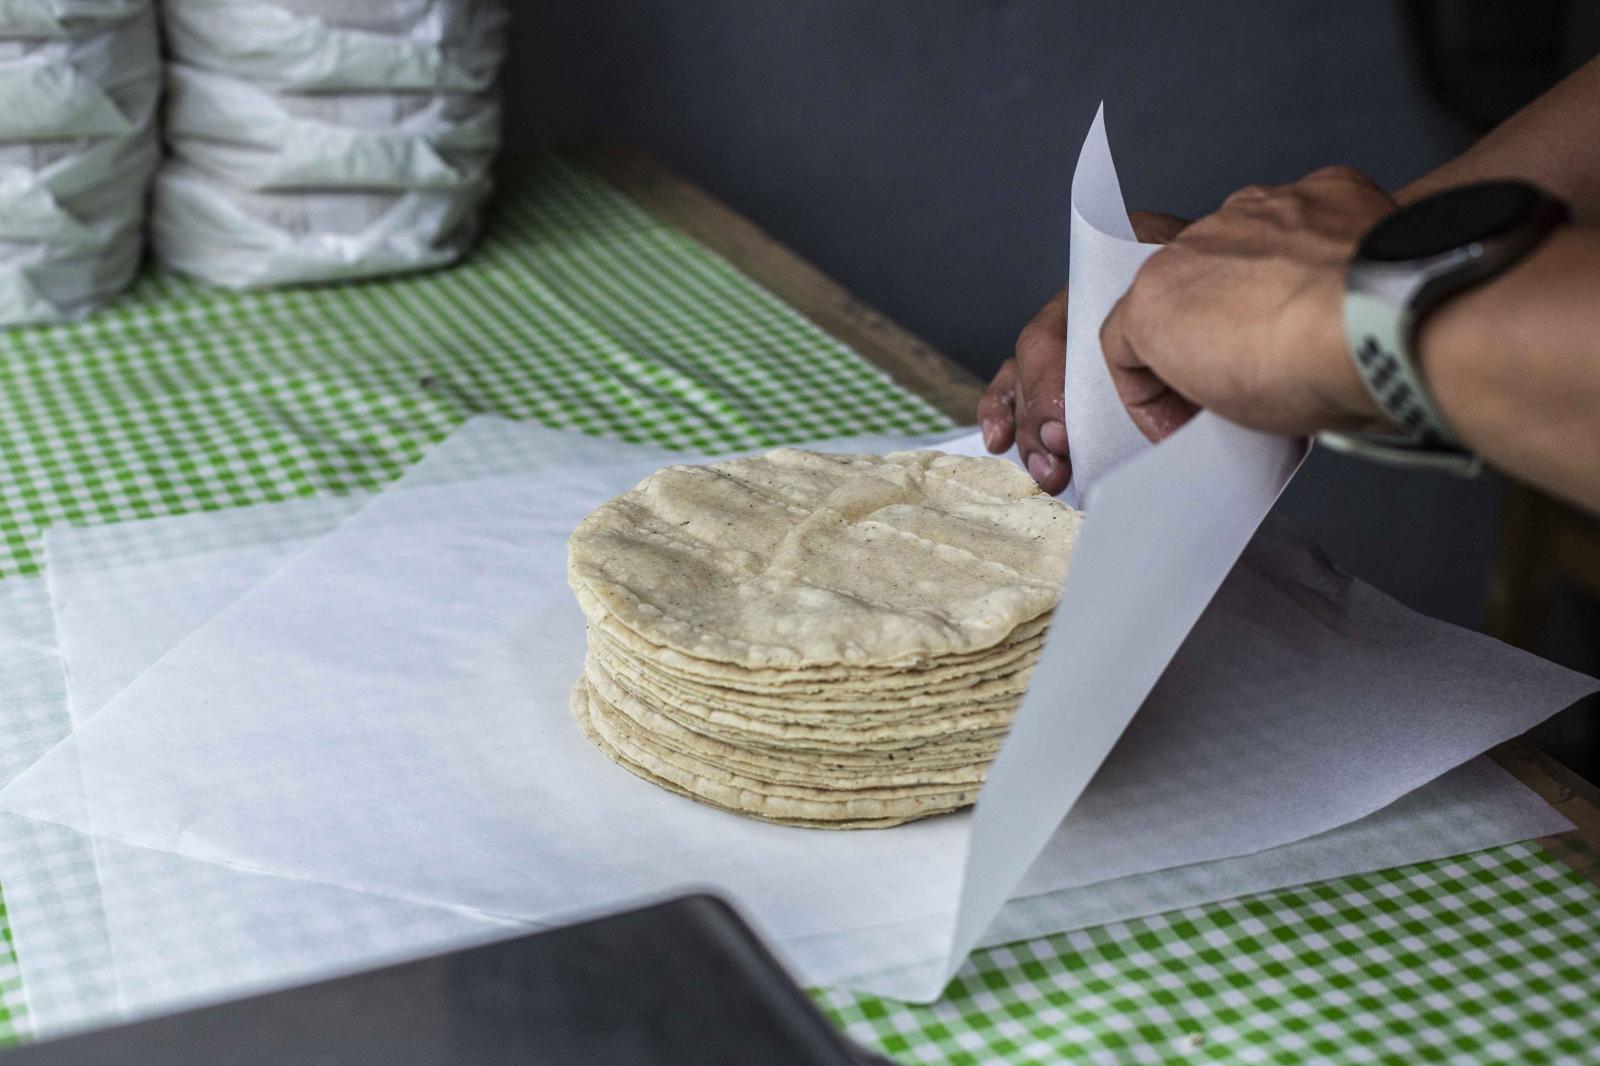 Bloomberg News: Tortilla Price Spike Leads Mexico to Consider Corn Imports